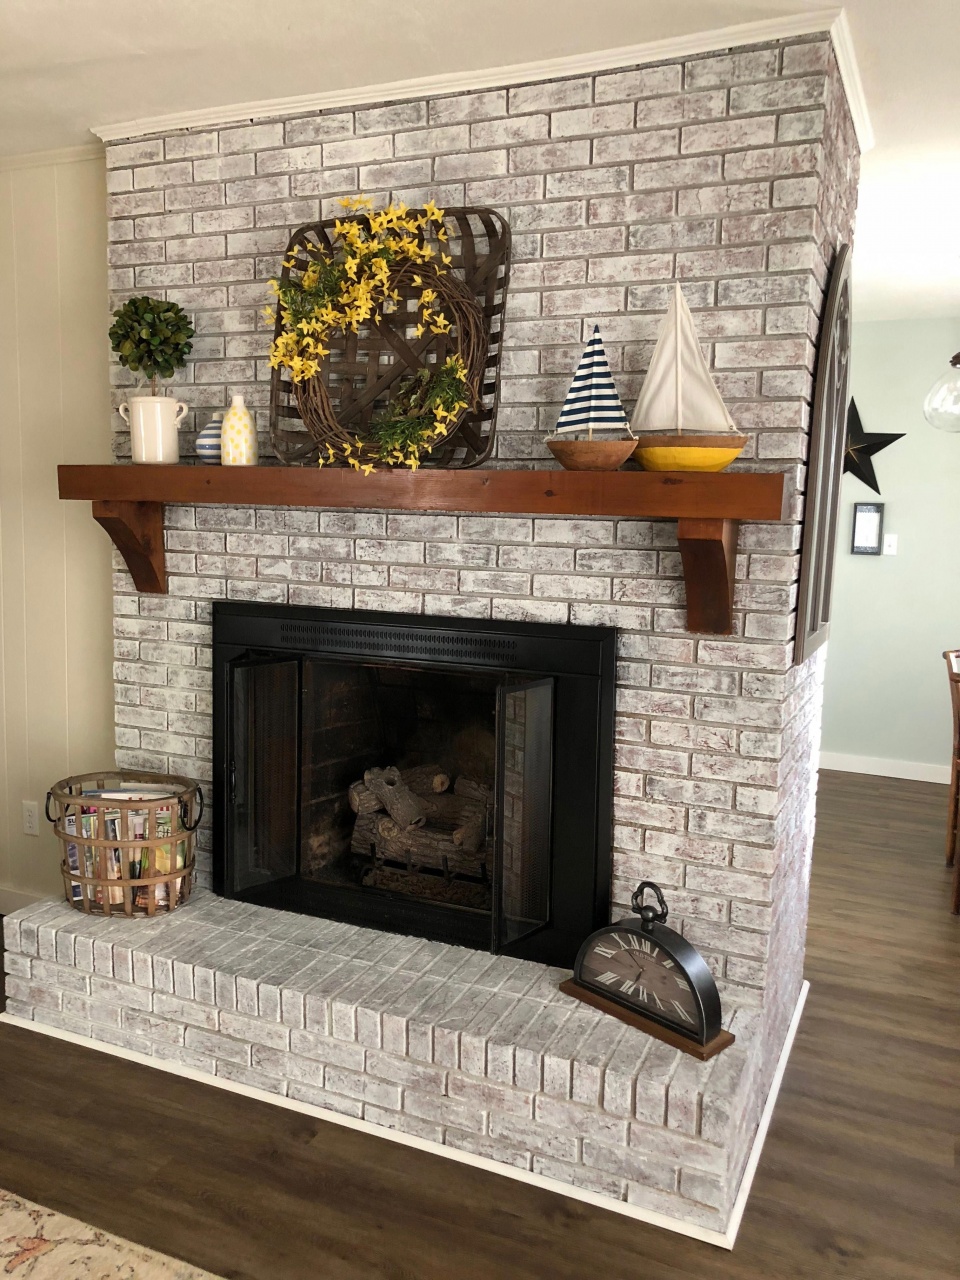 Shiplap Fireplace Elegant How to Whitewash Brick Fireplace – Fireplace Ideas From "how